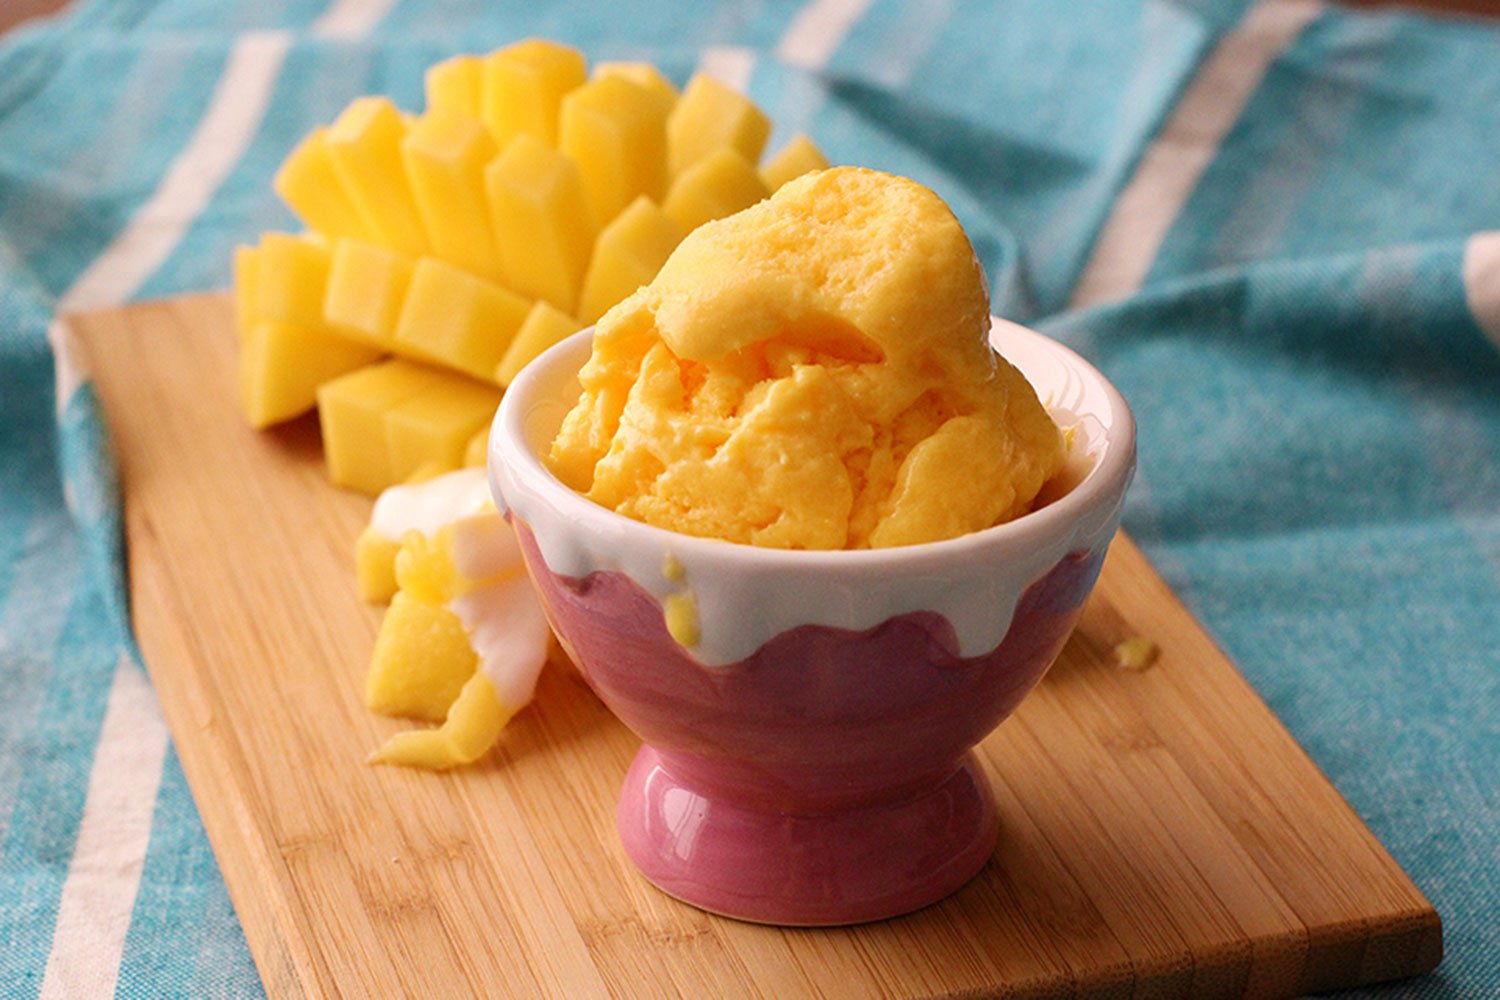 This simple two ingredient recipe makes a thick and creamy frozen yoghurt, in no time at all. Here it's served in an ice cream bowl, with fresh mango on the side.